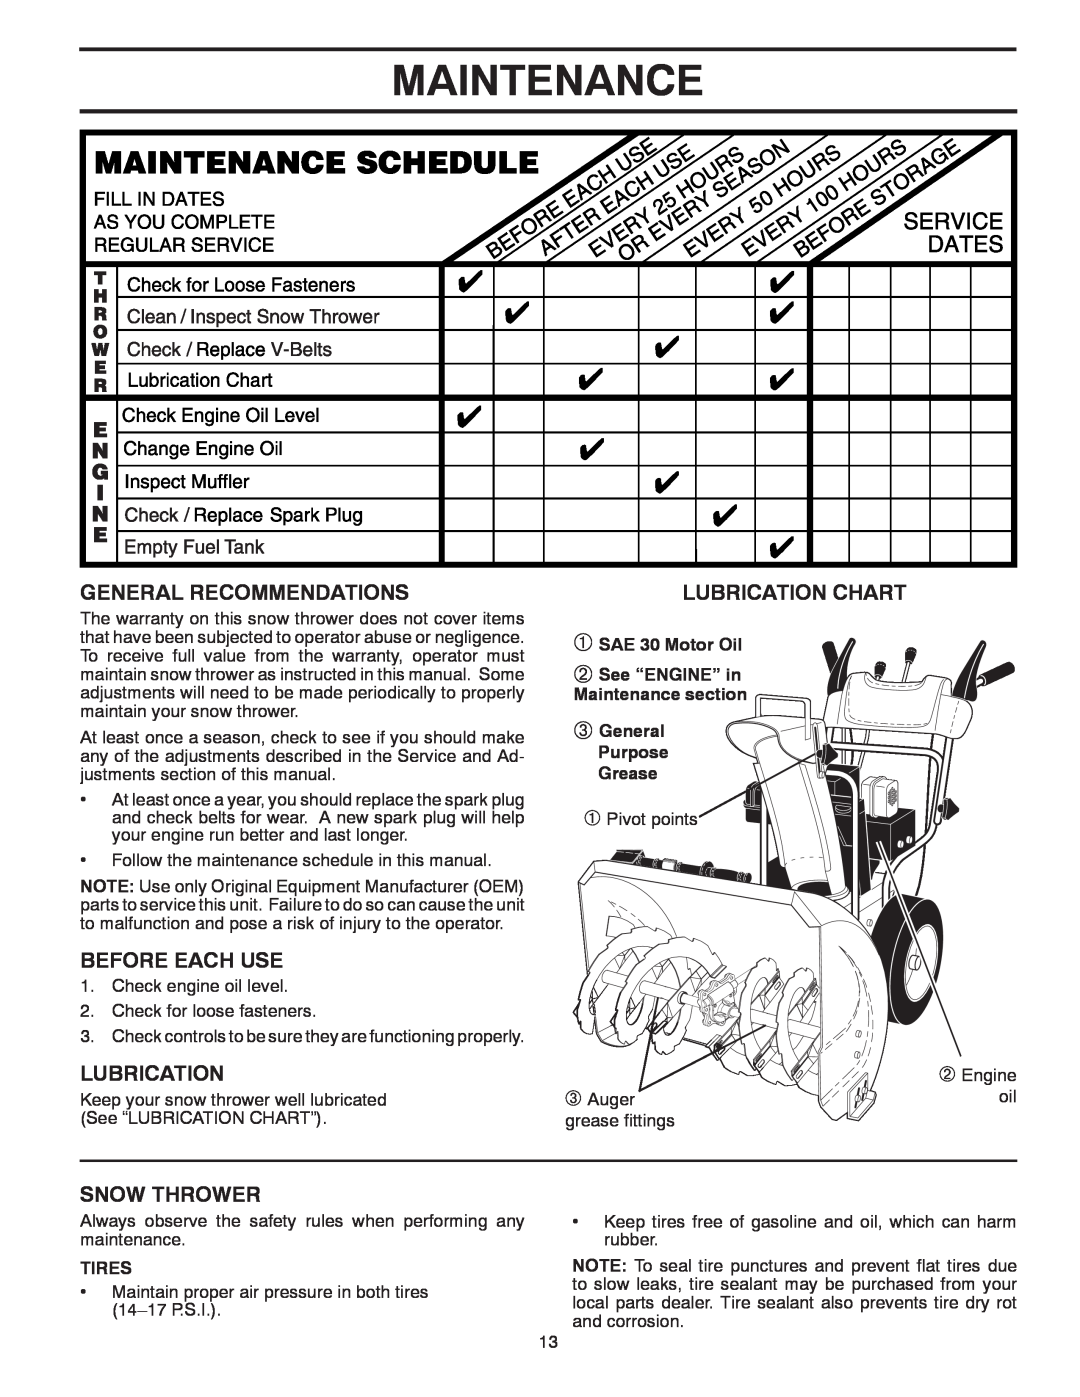 Poulan 96192003700 Maintenance, General Recommendations, Before Each Use, Snow Thrower, Lubrication Chart, Tires 